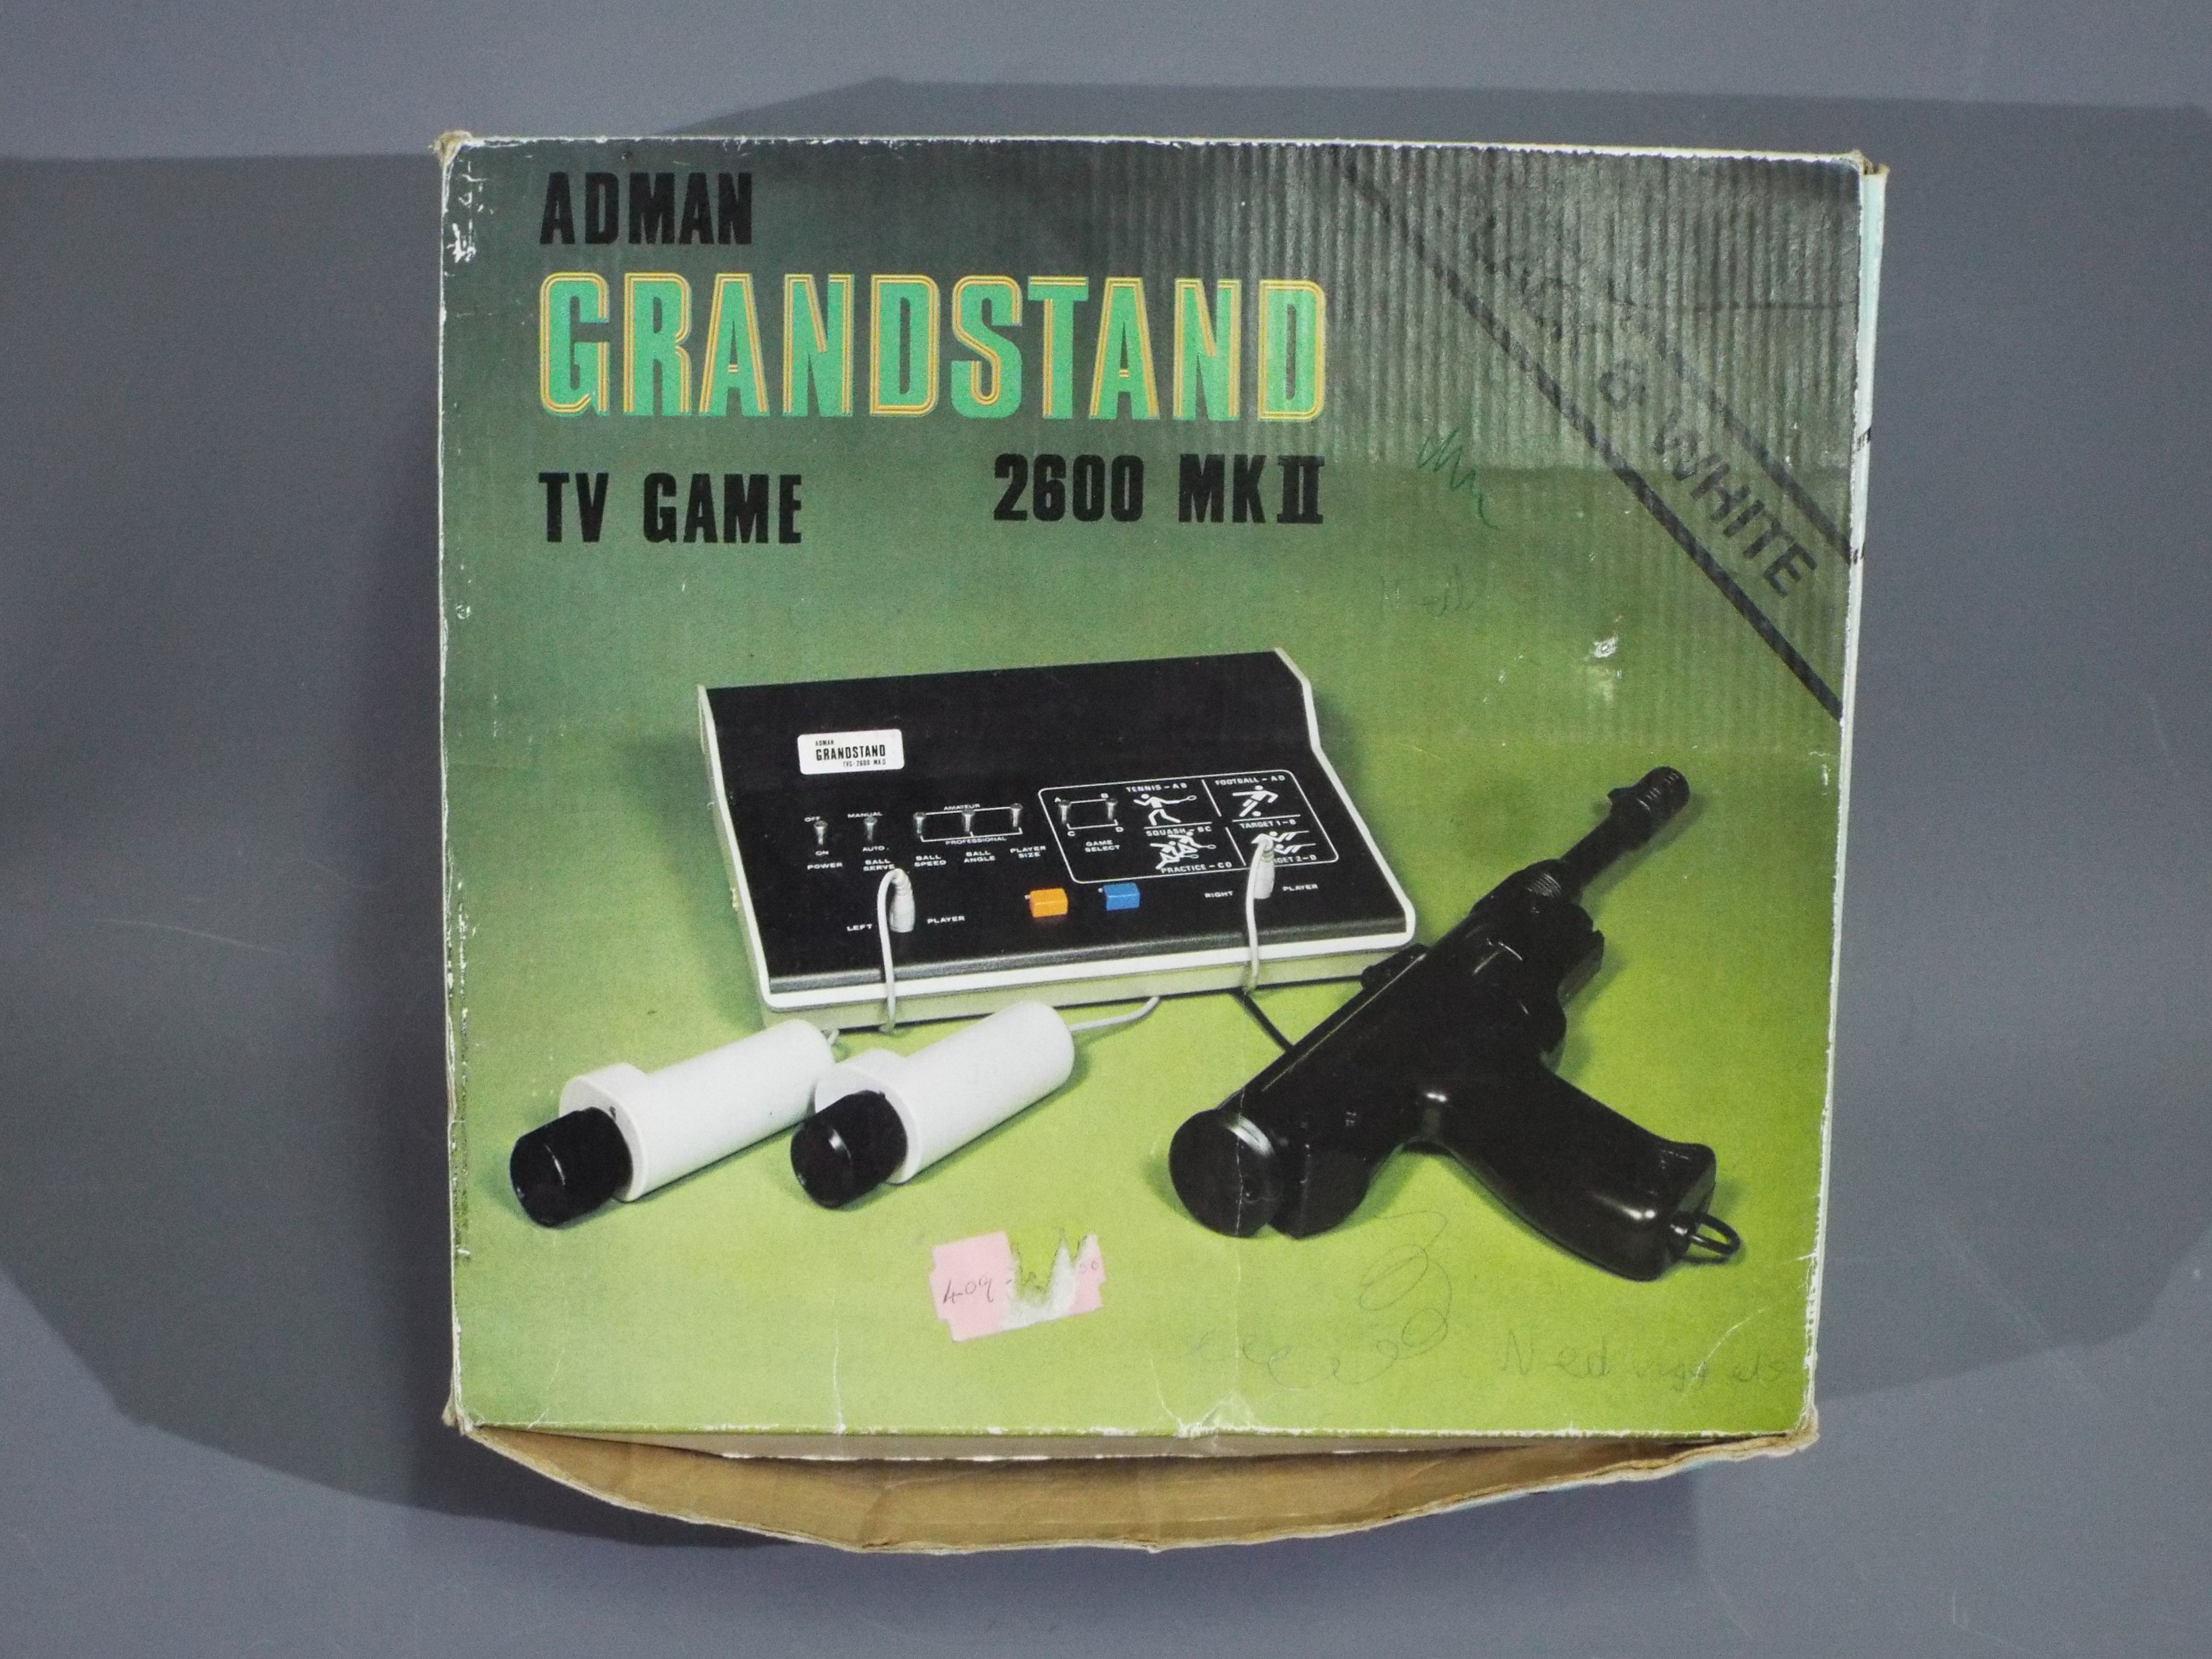 Adman - A boxed vintage Adman Grandstand 2600 MKII TV Game (Black & White). - Image 3 of 3